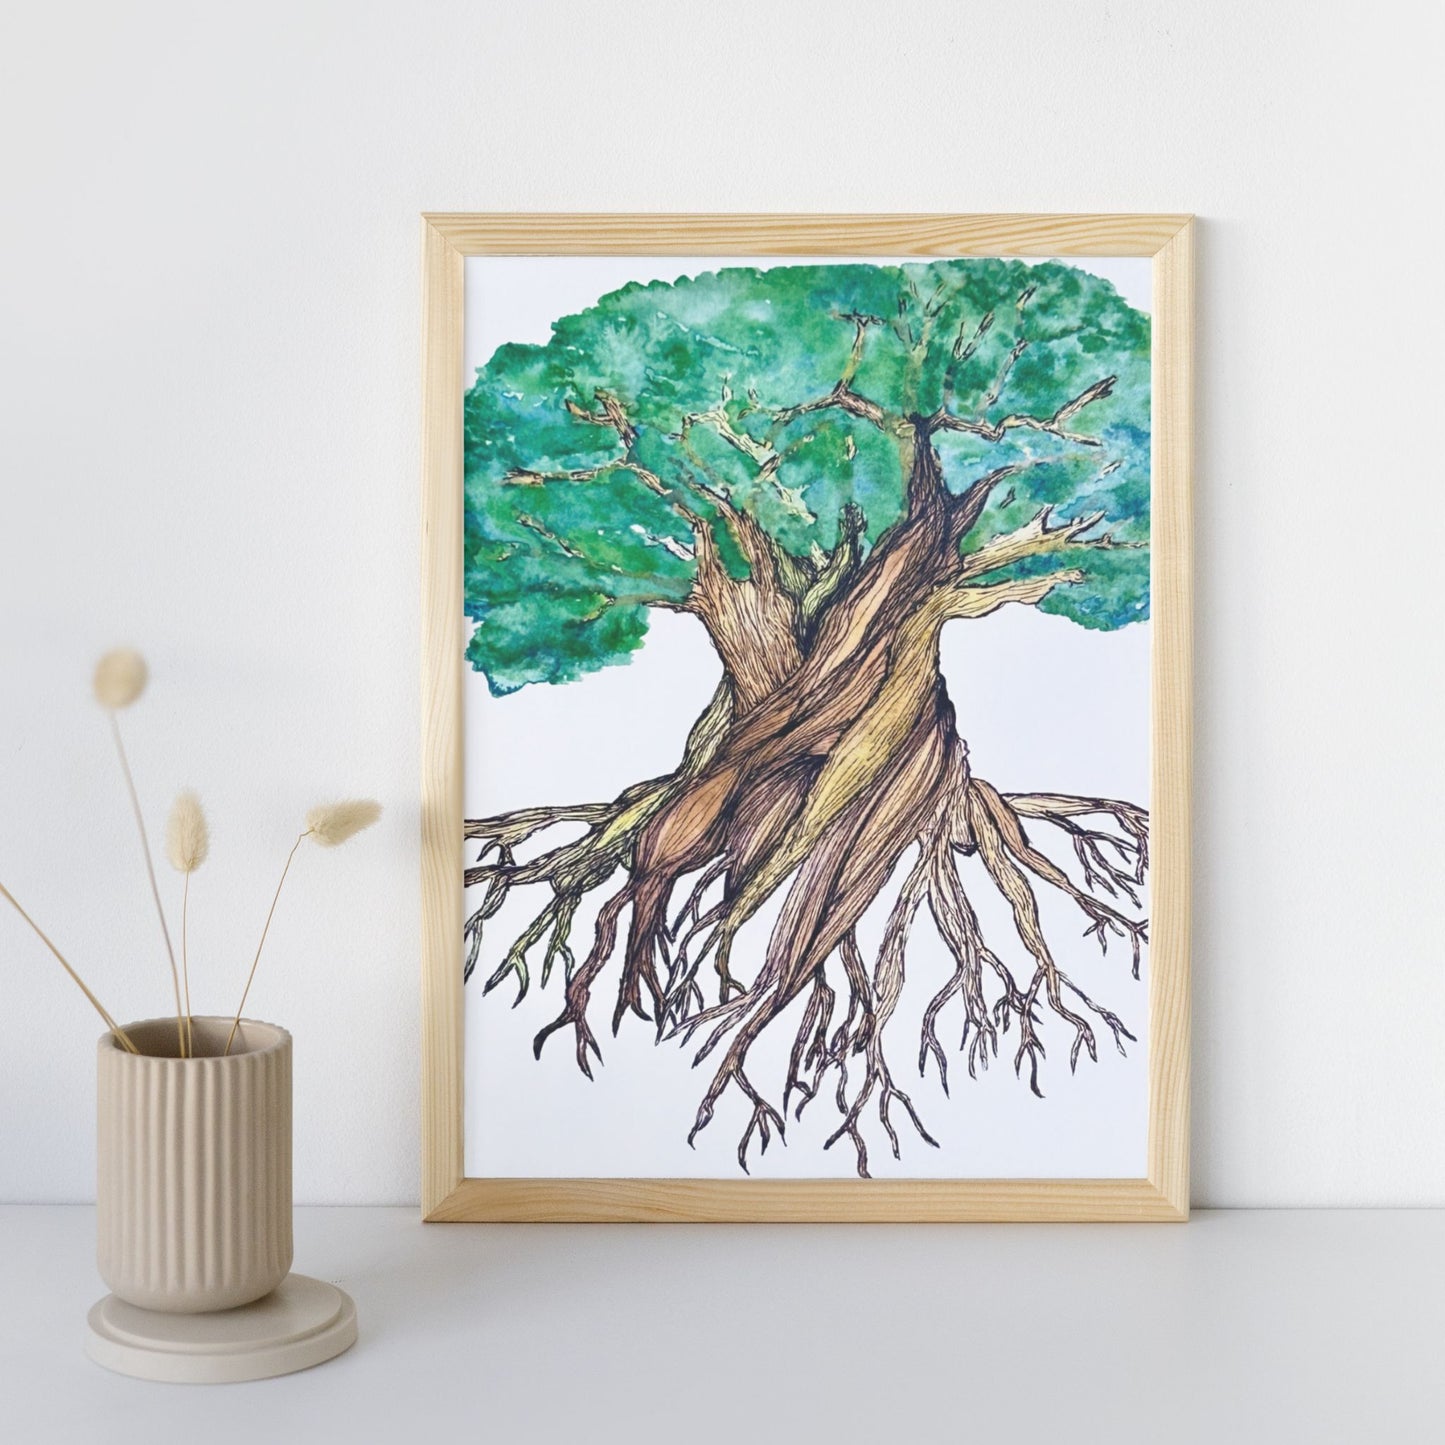 Roots of Life - The Serene Tree of Life Watercolor